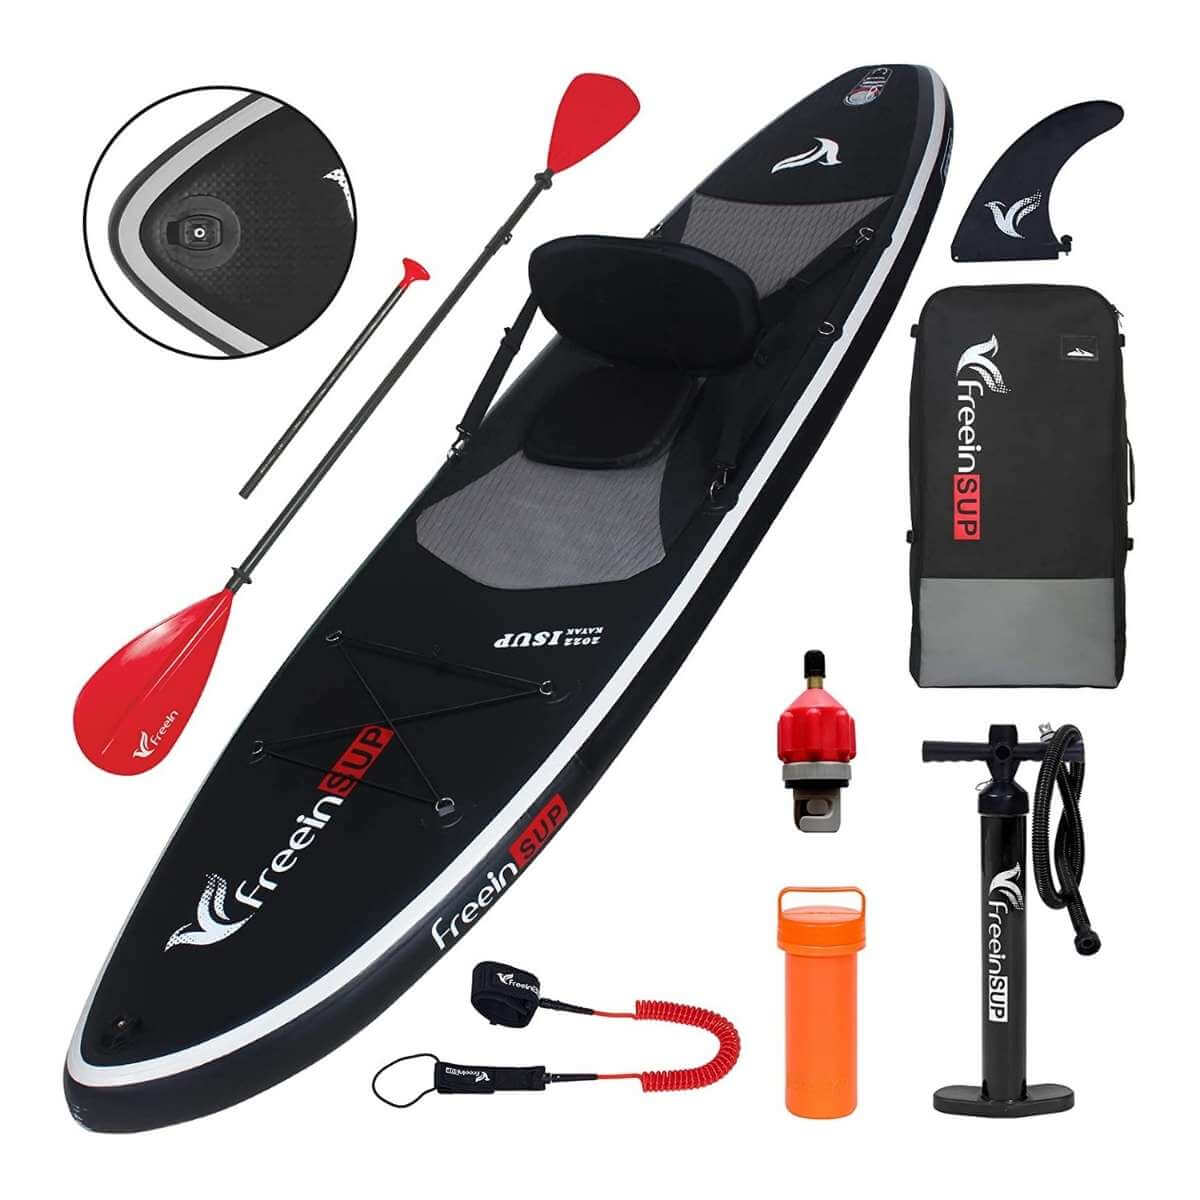 Freein Kayak SUP Inflatable Stand-Up Paddle Board